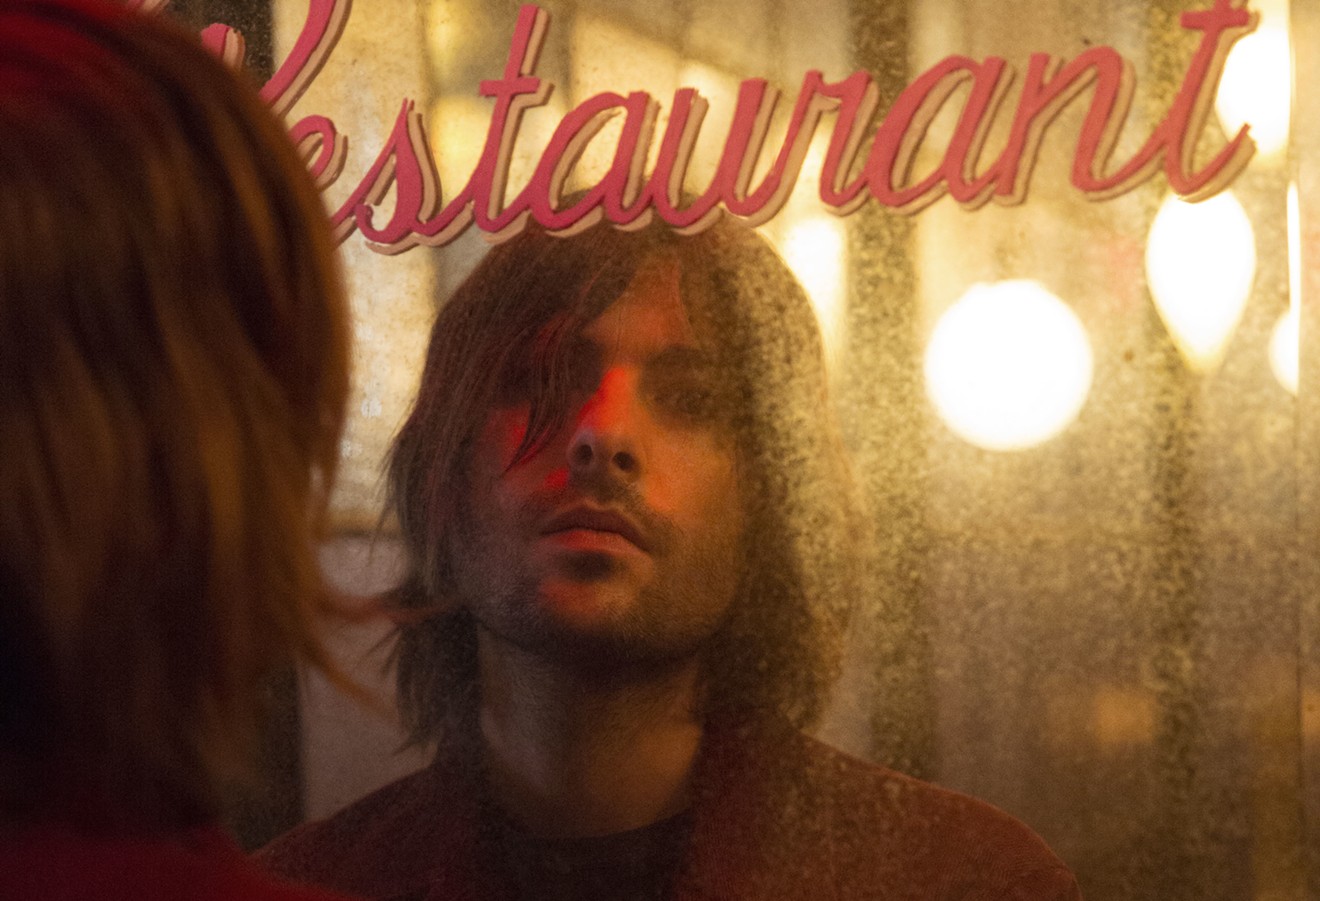 Robert Schwartzman, frontman of Rooney. The band will open for Jimmy Eat World on March 11.